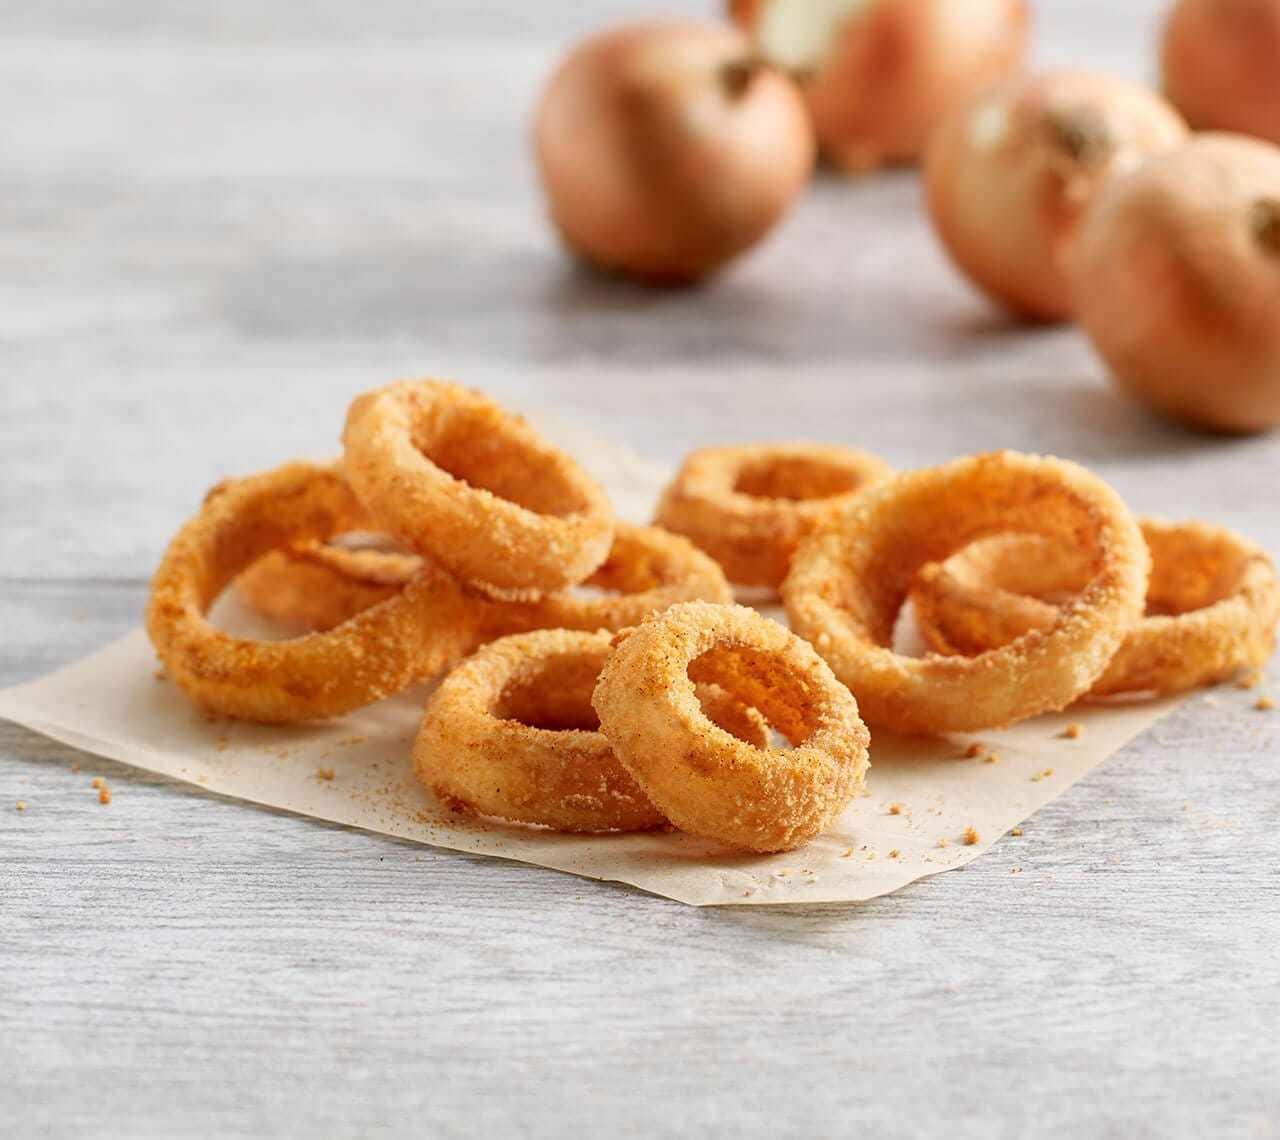 A&W Onion Rings Nutrition Facts